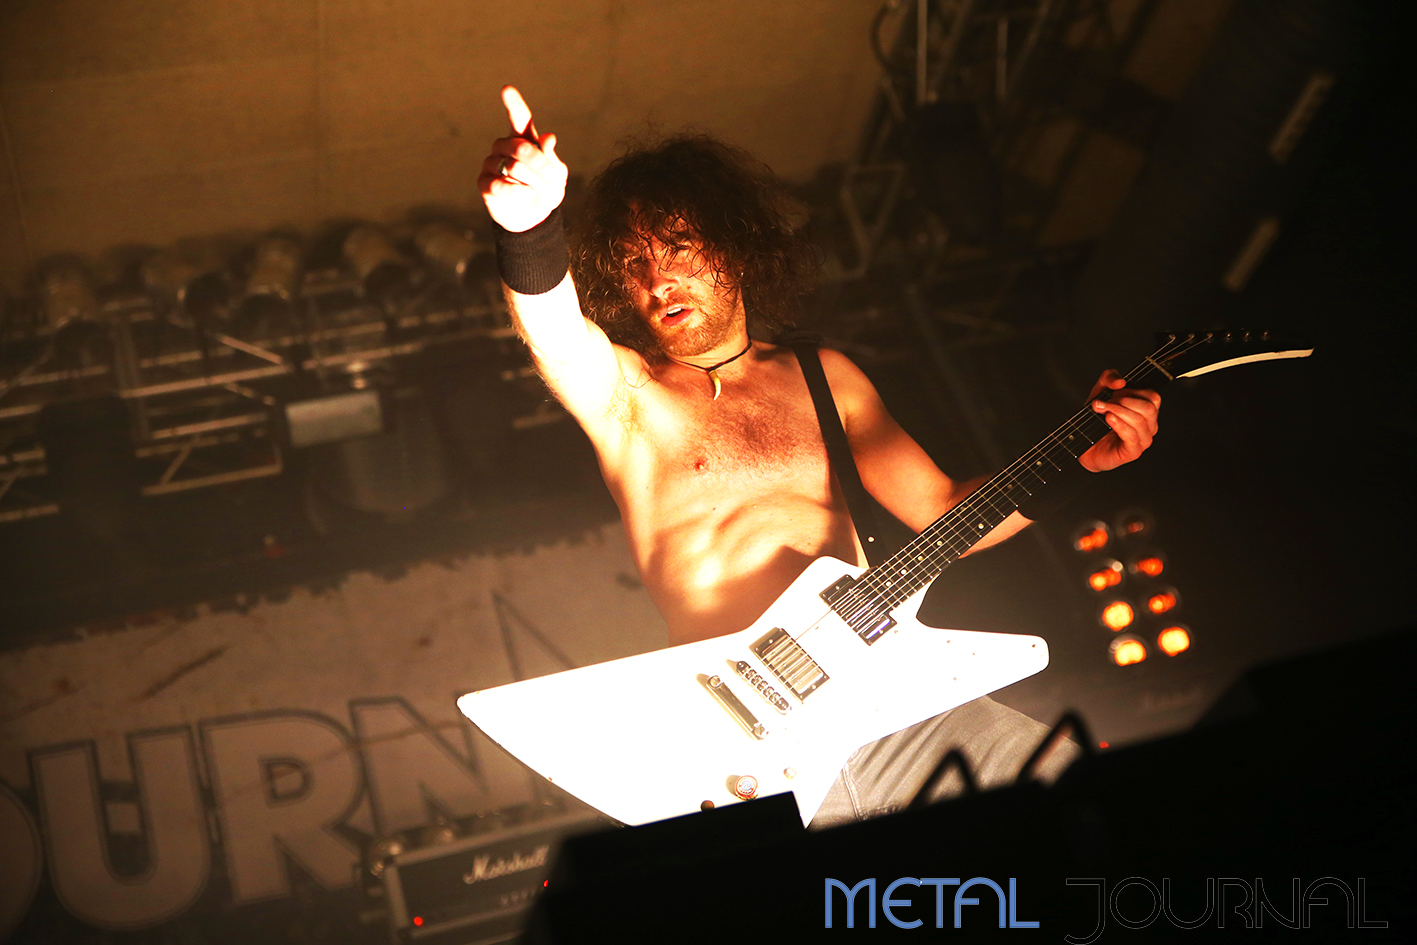 airbourne - metal journal bilbao 2019 pic 6